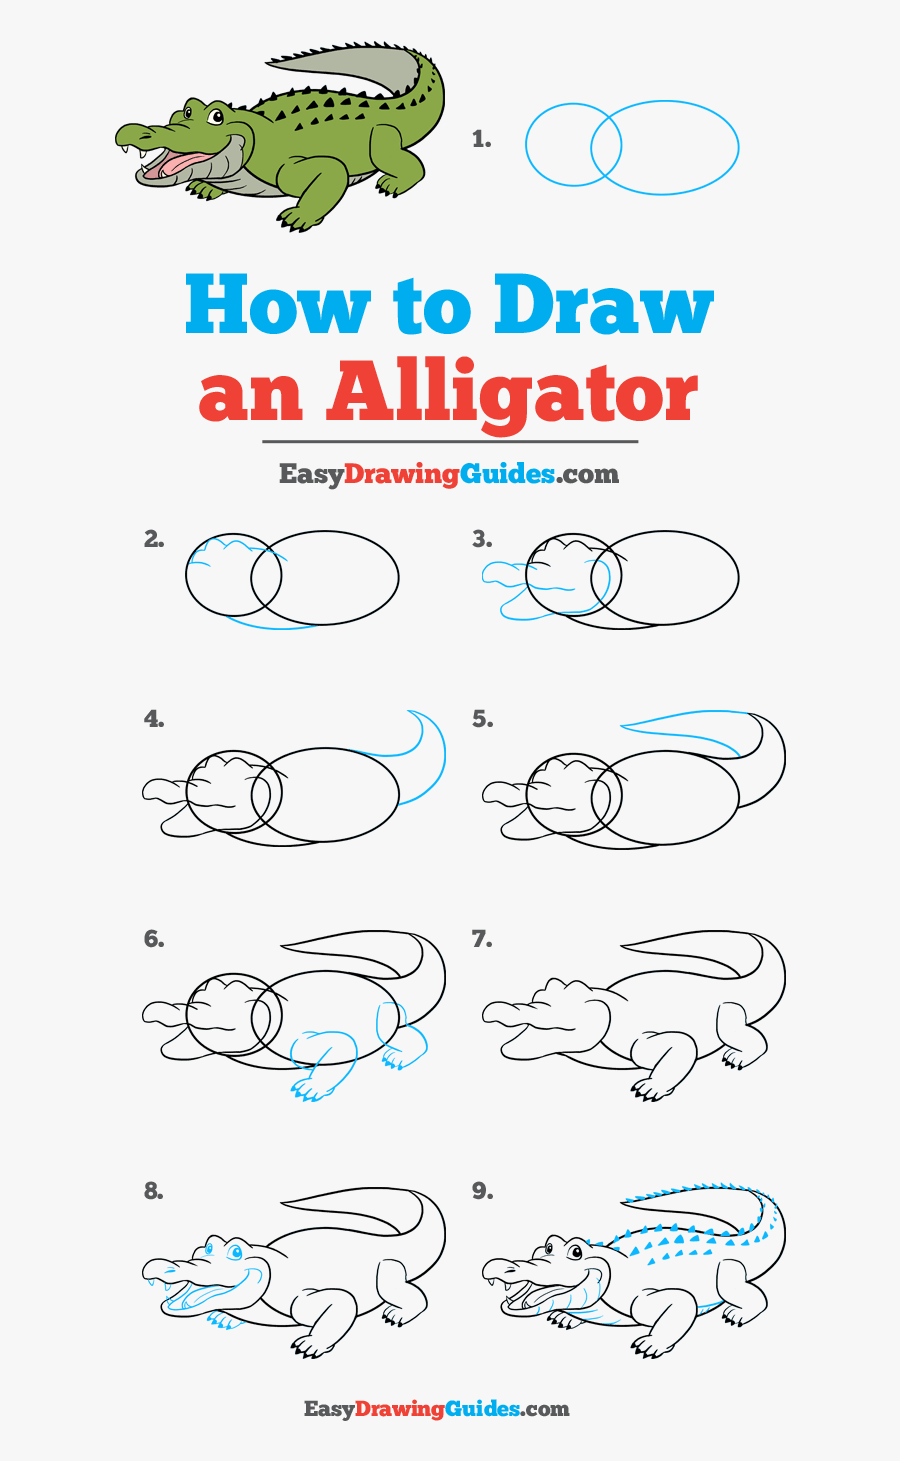 How To Draw An Alligator - Drawing, Transparent Clipart